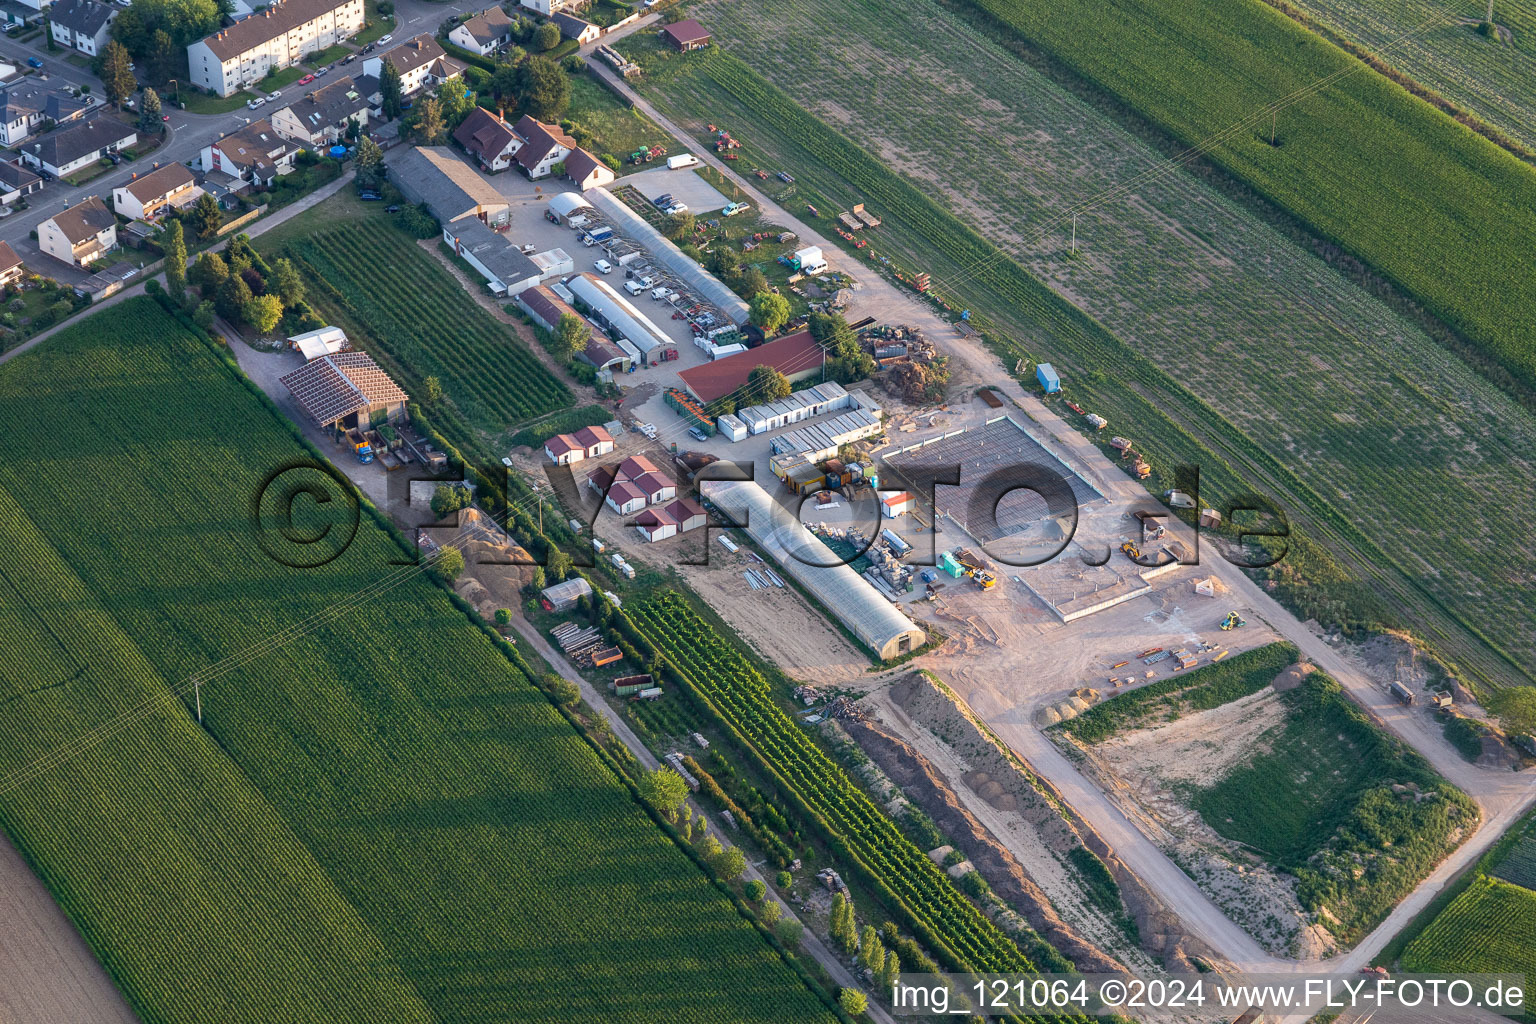 Aerial view of Kugelmann organic vegetables in Kandel in the state Rhineland-Palatinate, Germany